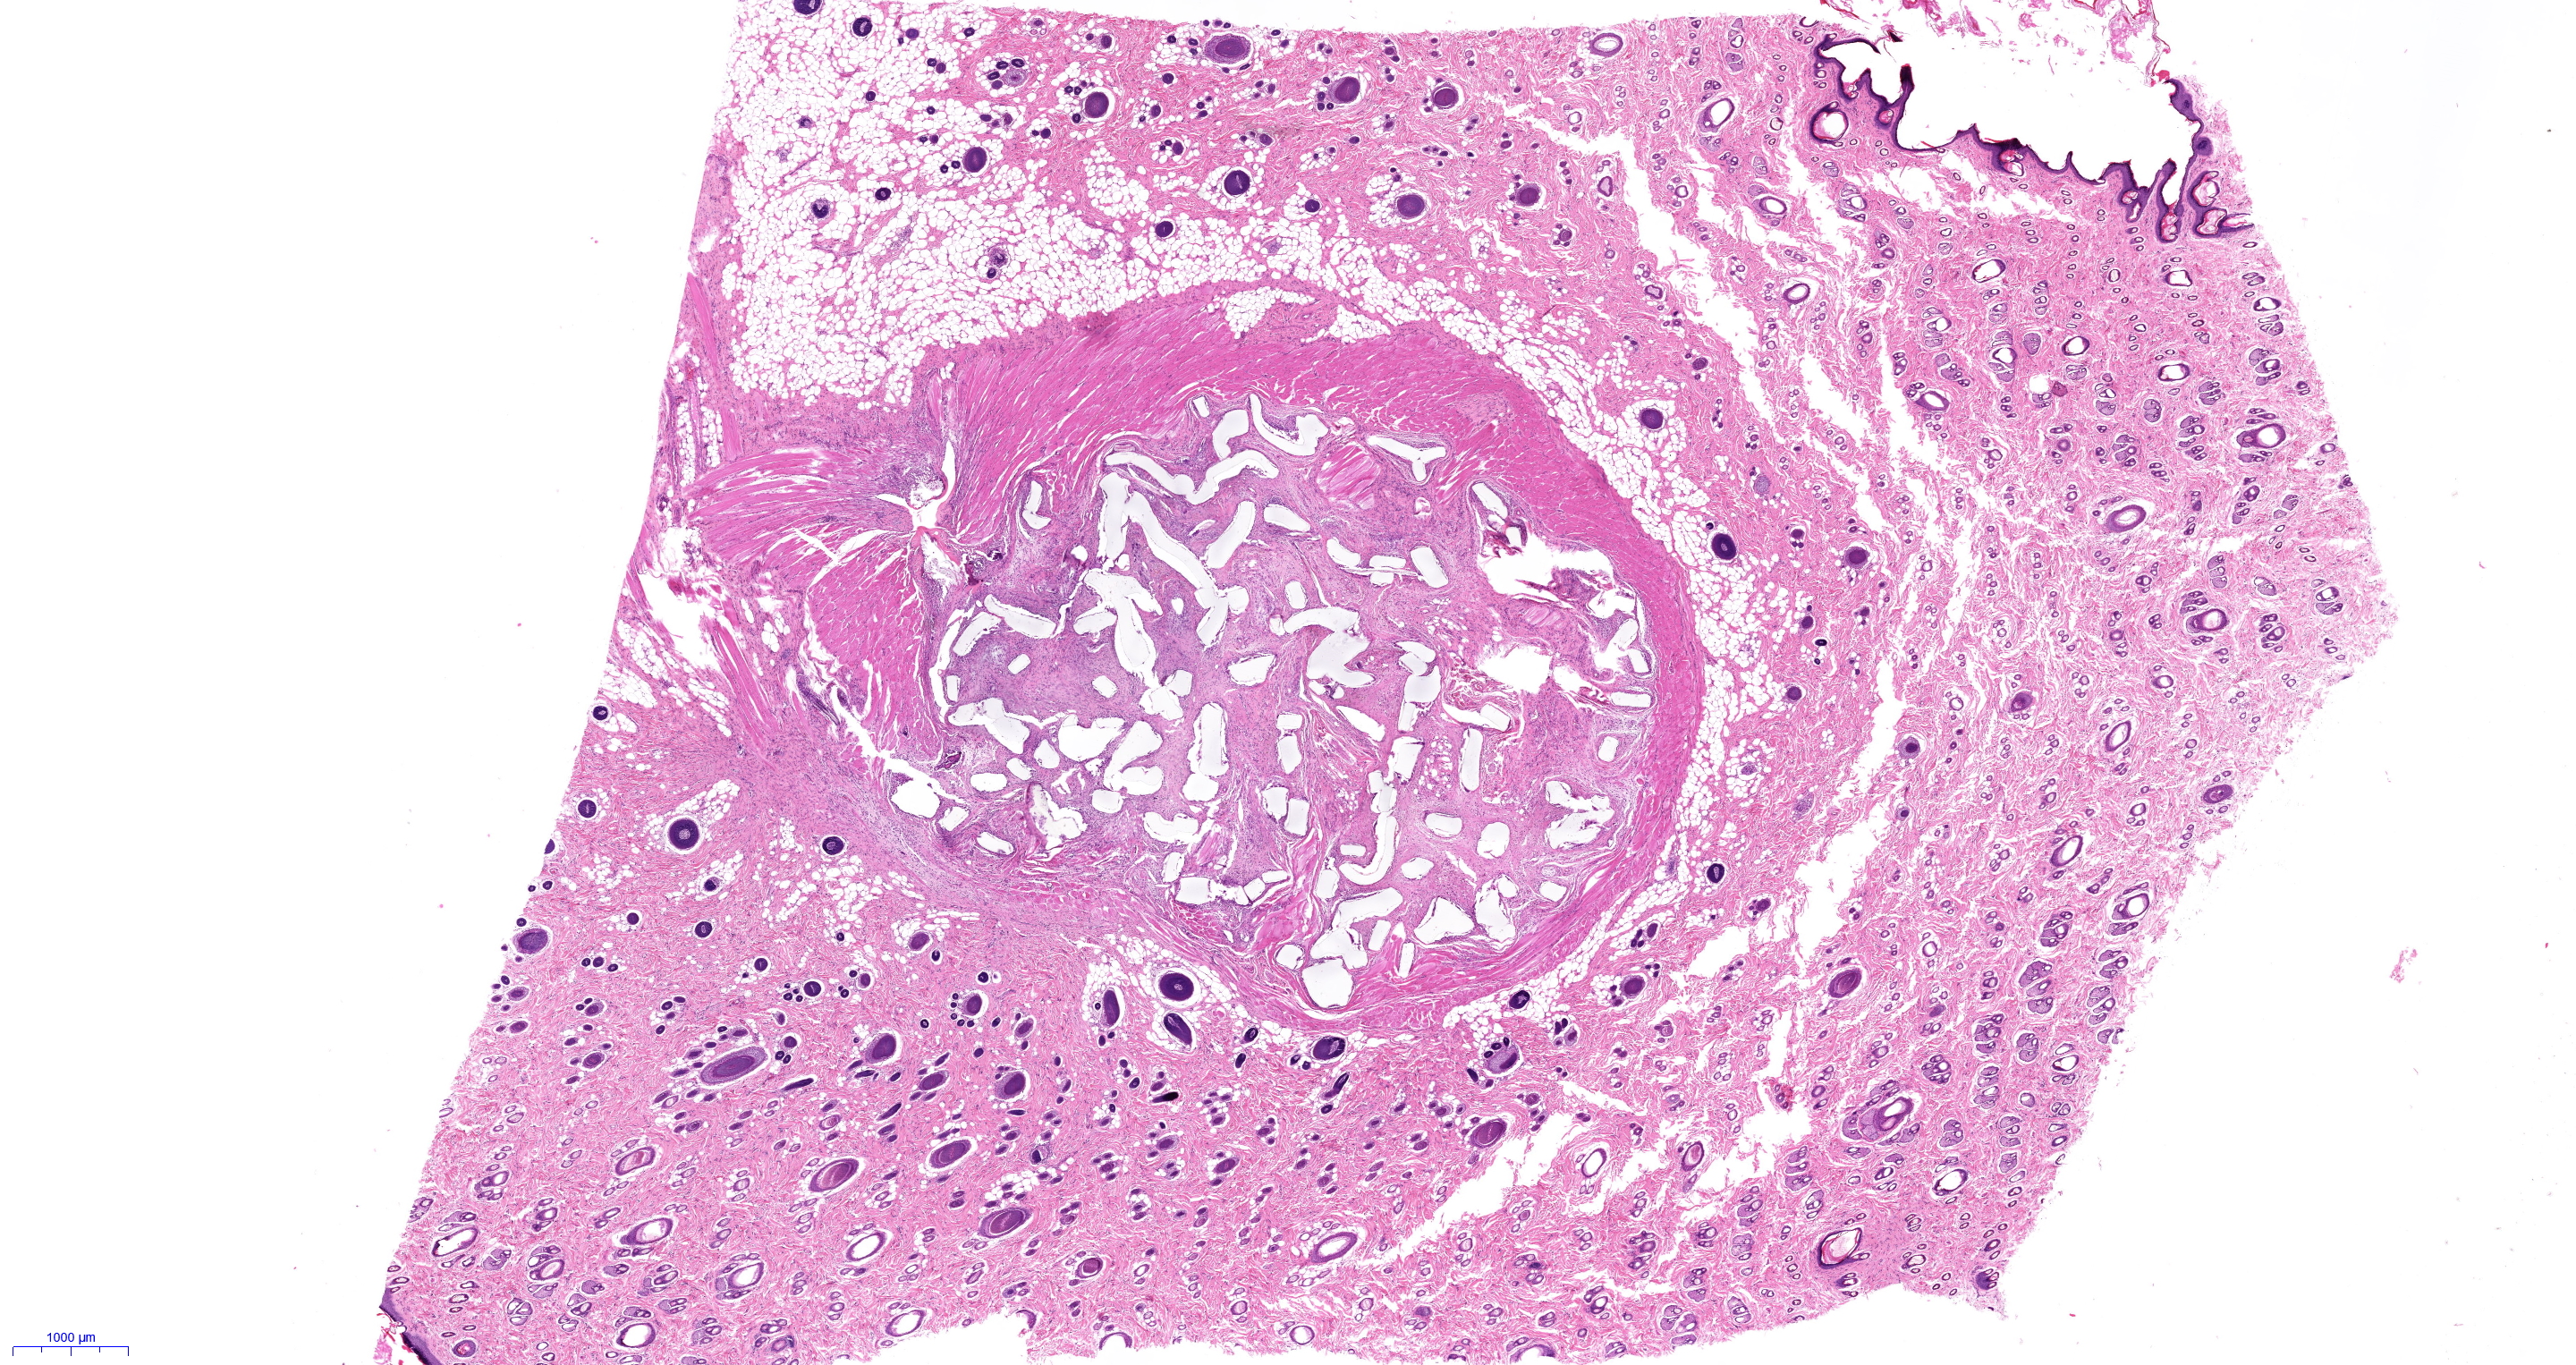 H&E section (stained with haematoxylin and eosin) of a highly porous StarPore® scaffold, implanted subcutaneously in a rat for 4 weeks showing extensive soft tissue ingrowth.